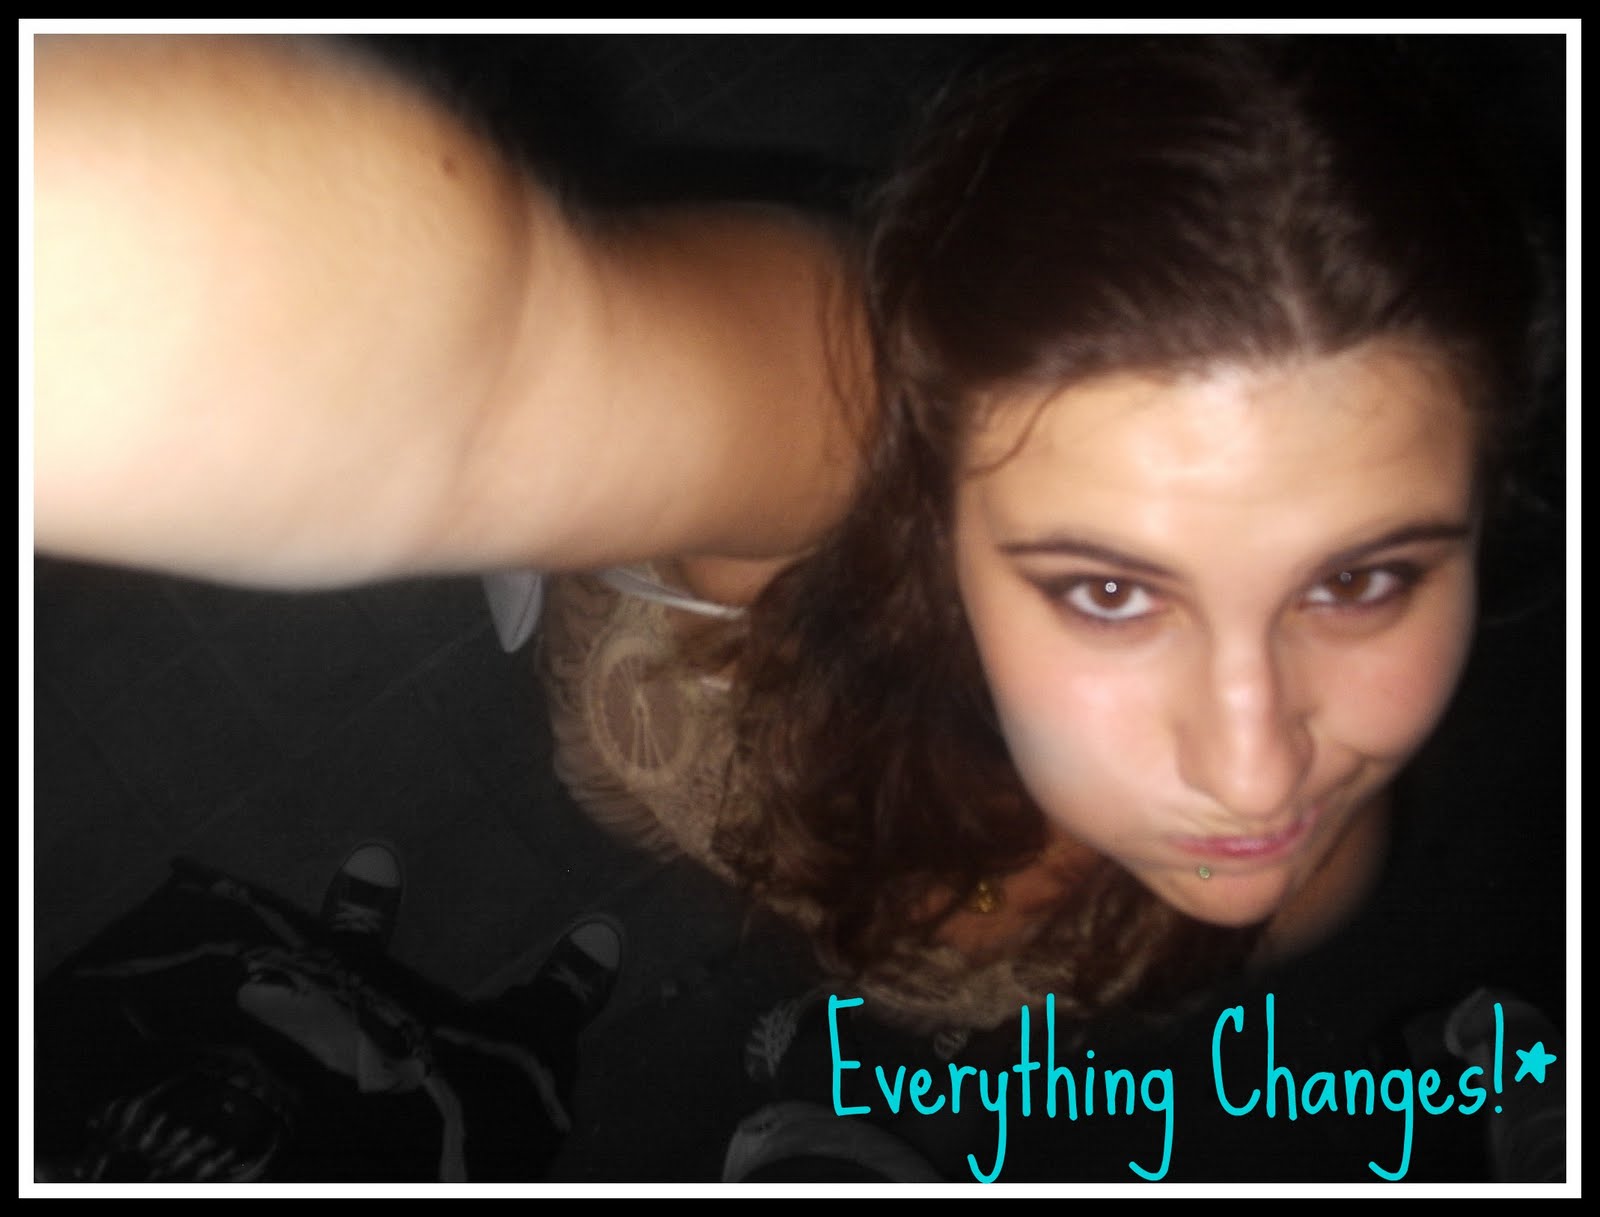 Everything Changes!*